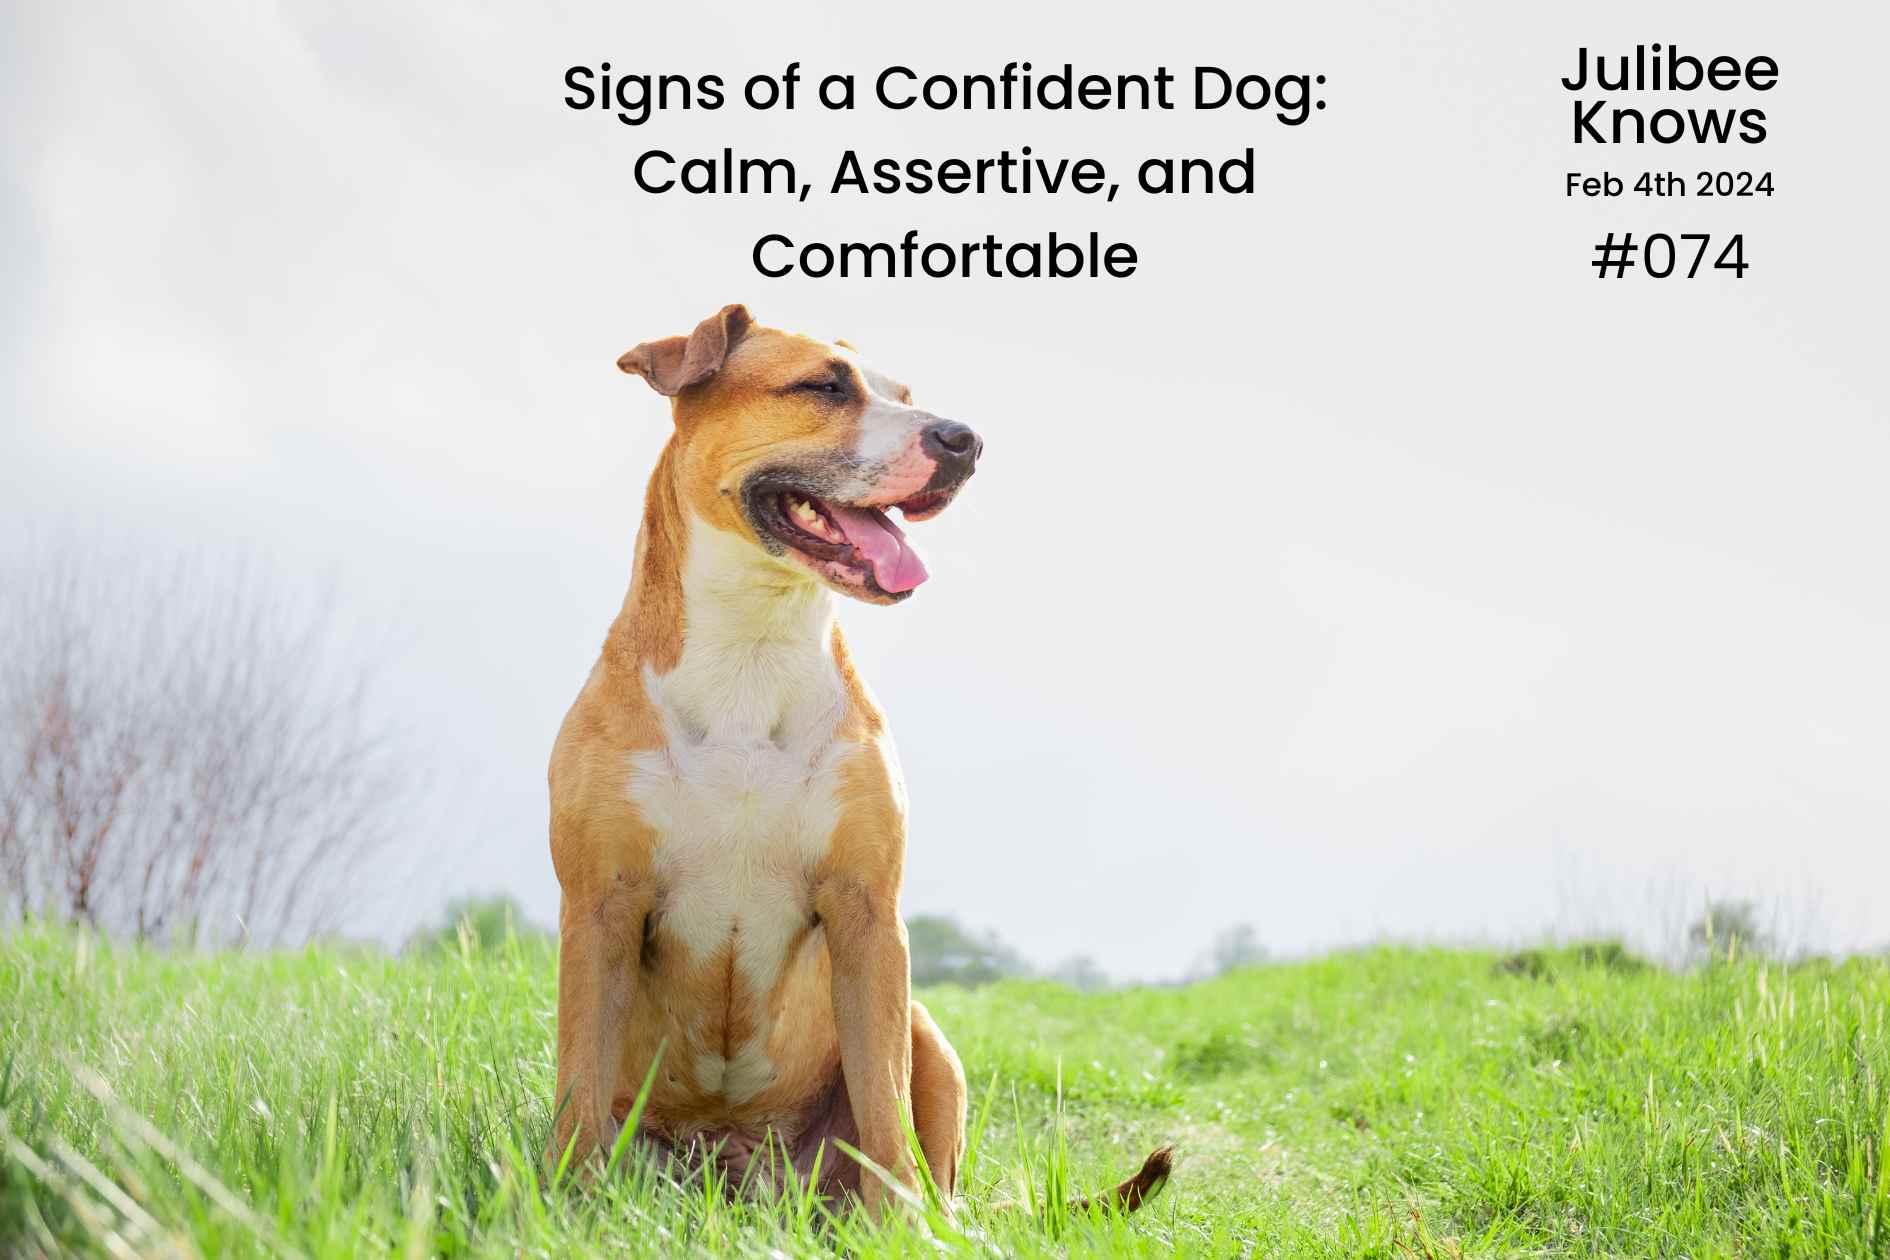 Signs of a Confident Dog Calm, Assertive, and Comfortable